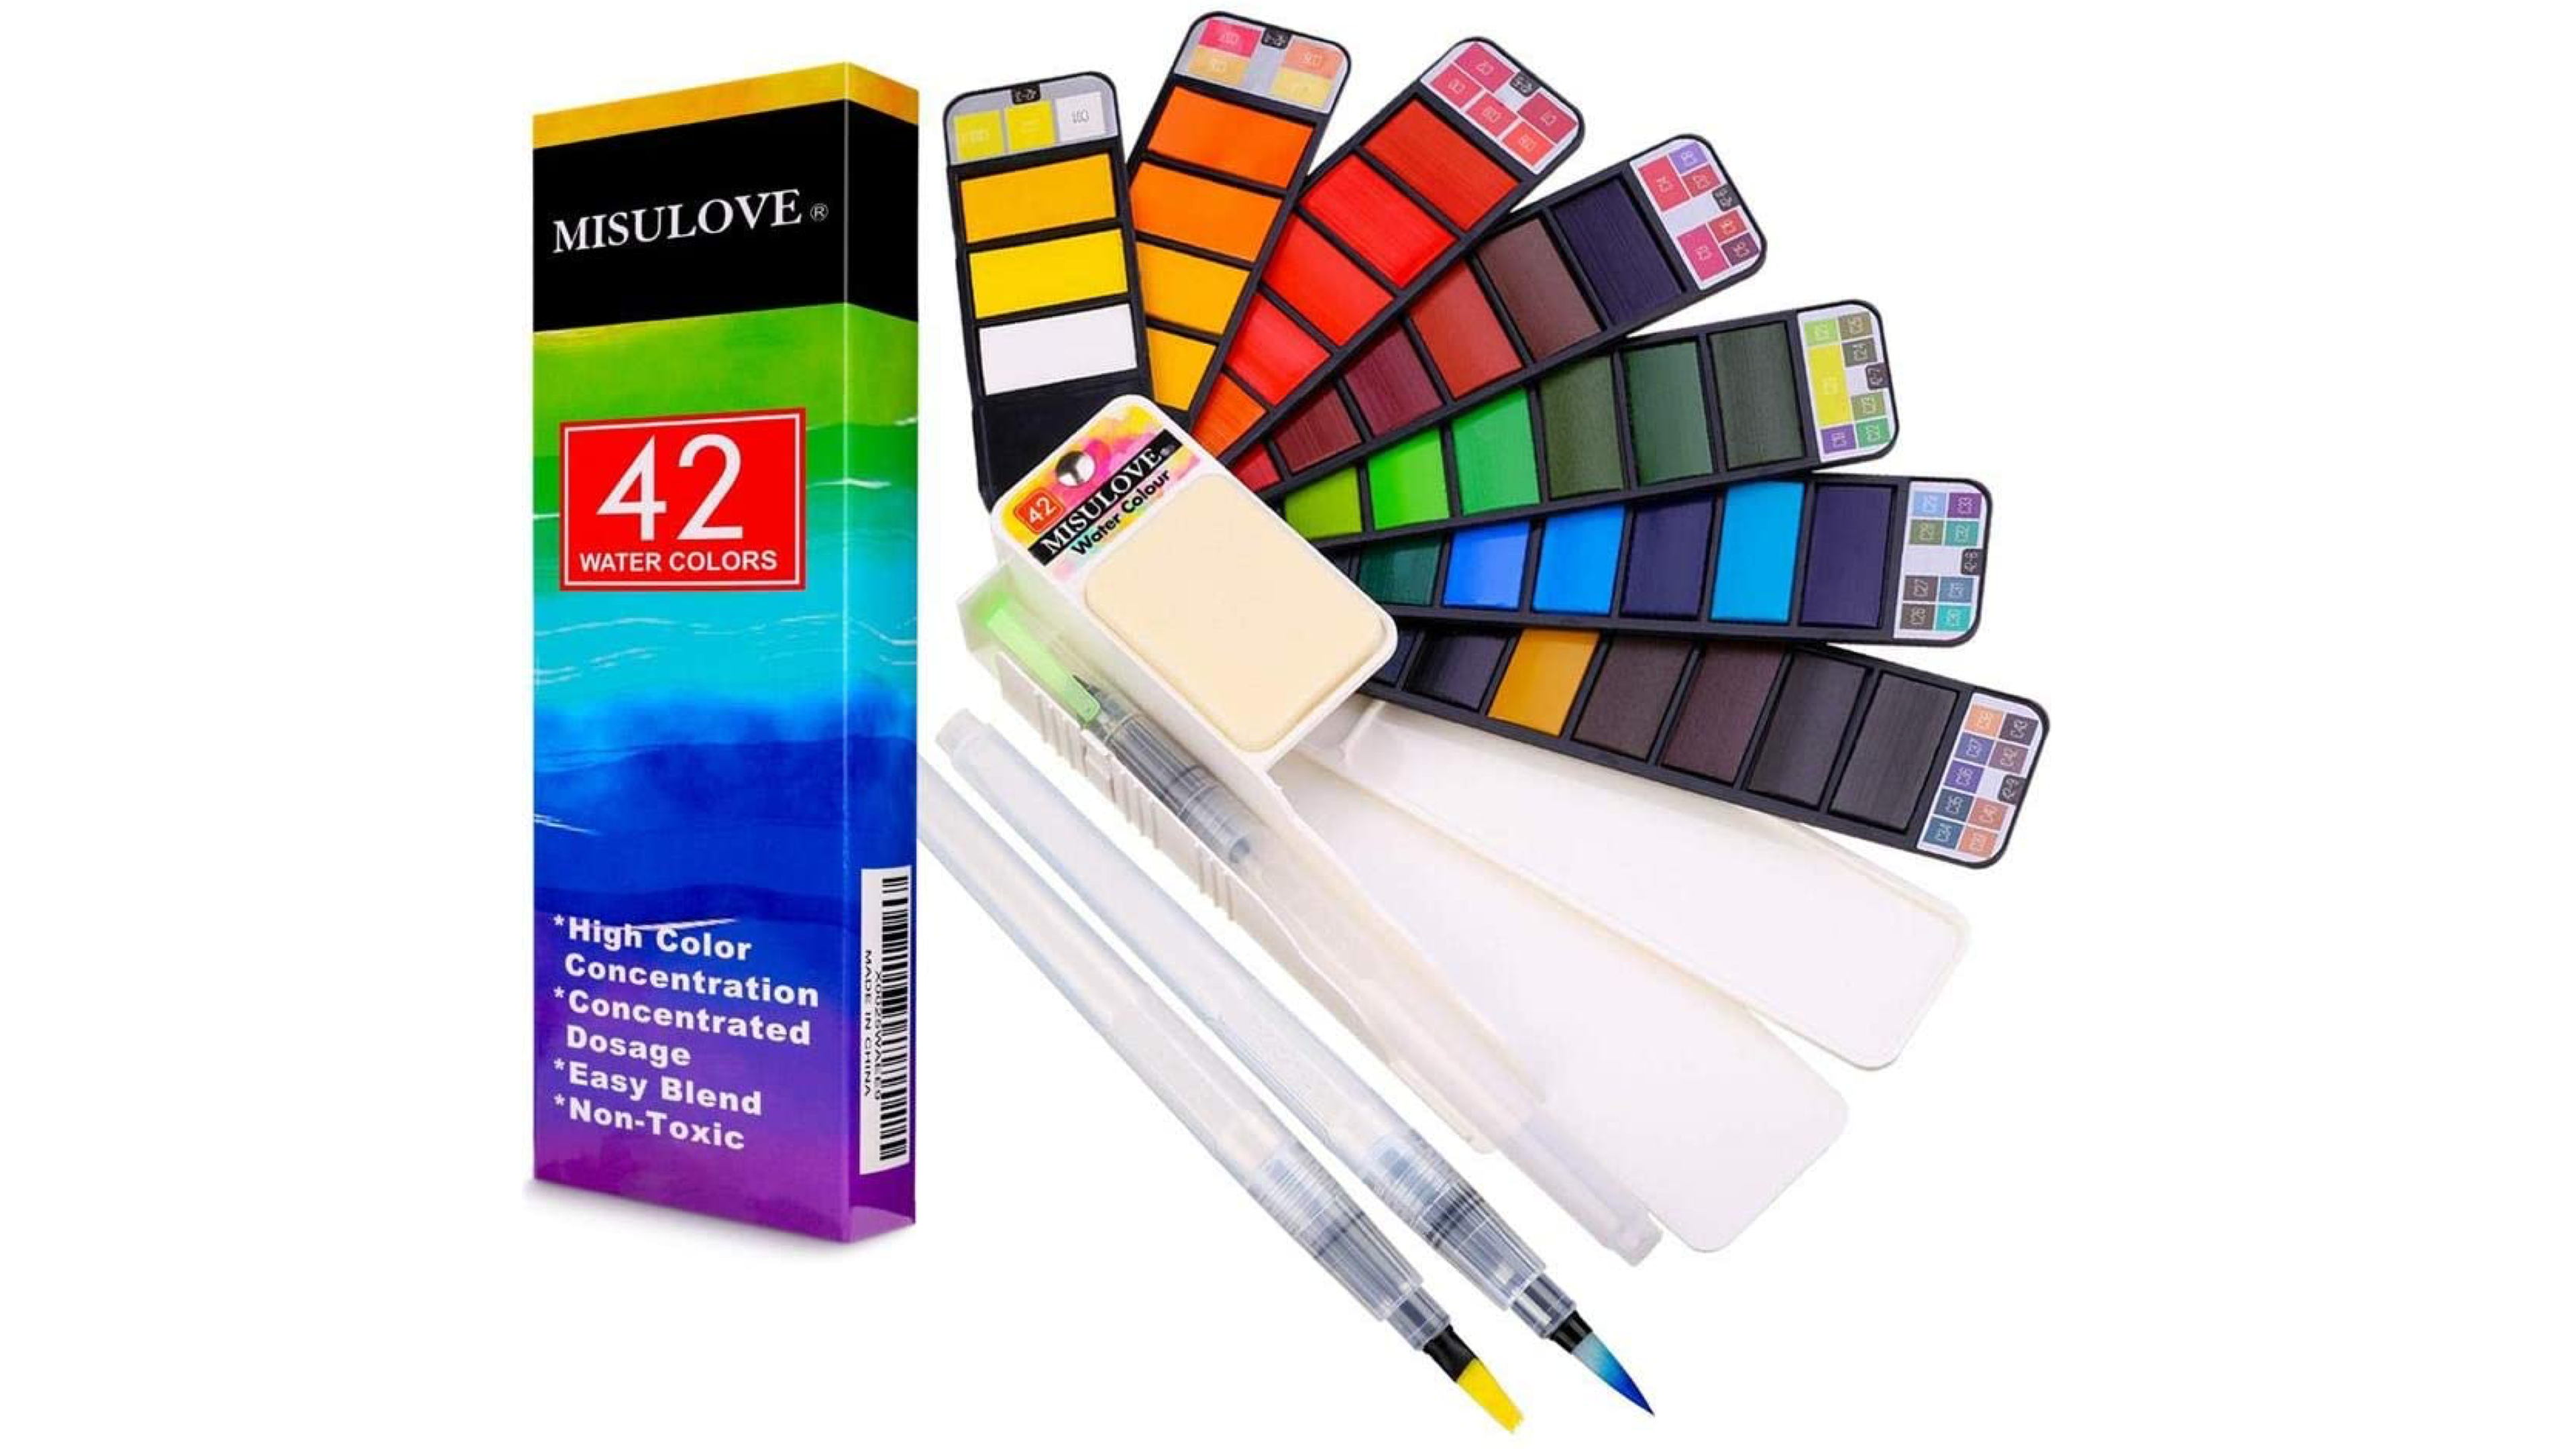 compact watercolor set with 42 colors and brushes that dispense water